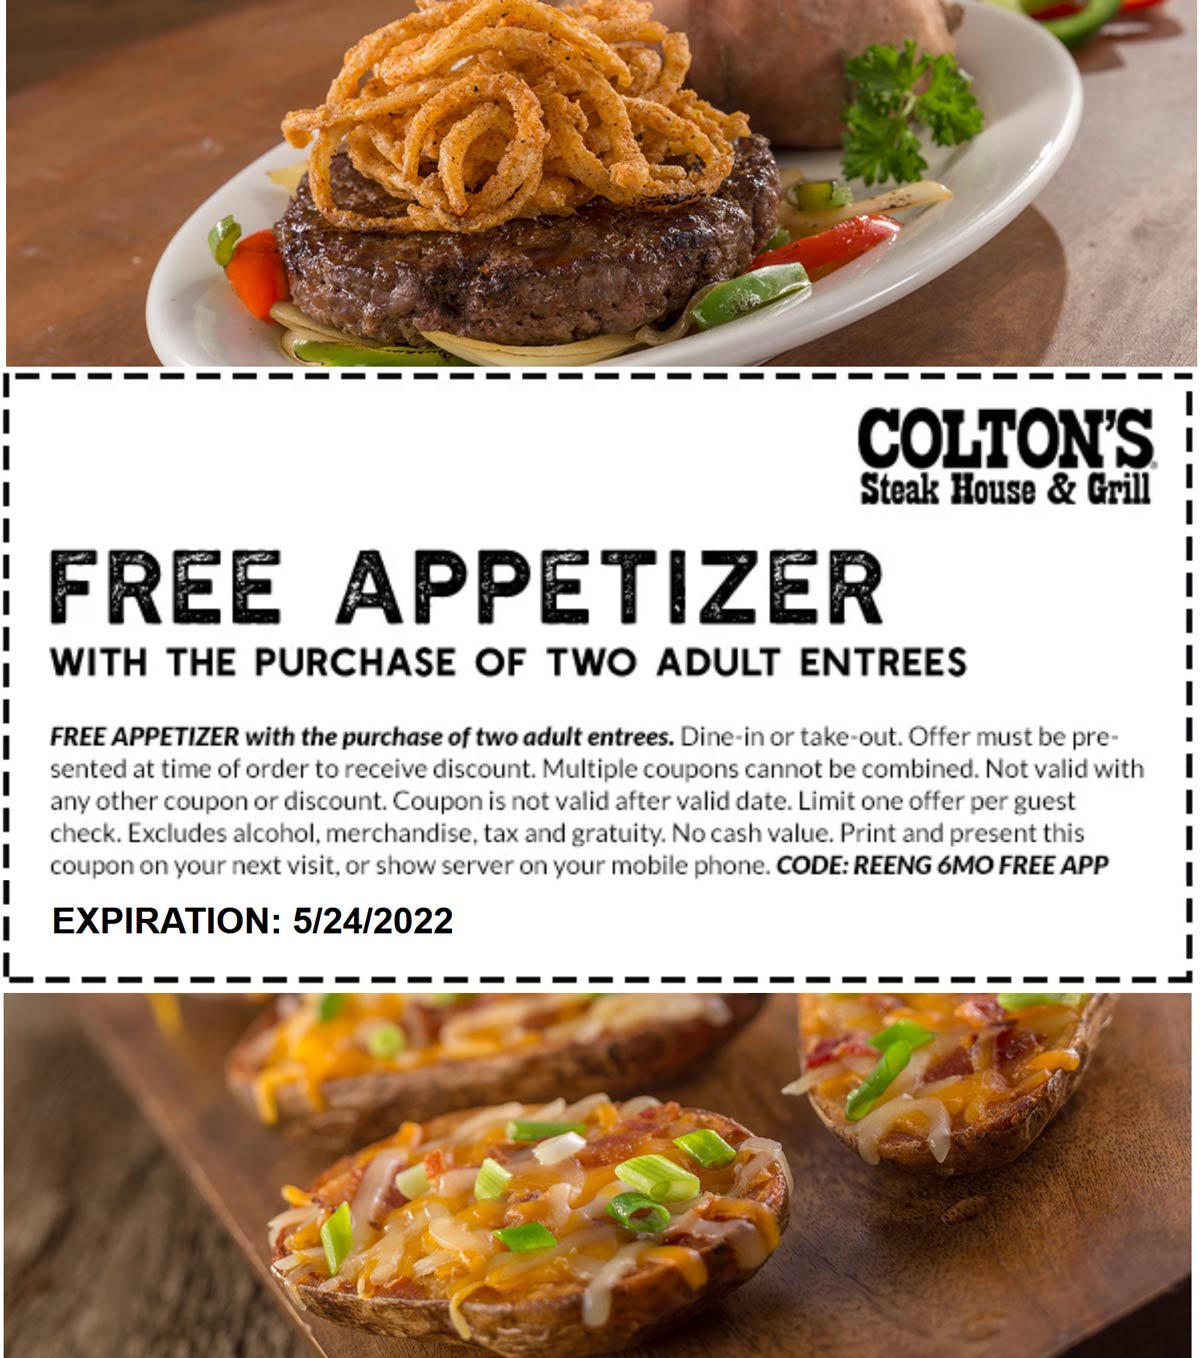 Coltons restaurants Coupon  Free appetizer with your entrees at Coltons Steak House & Grill #coltons 